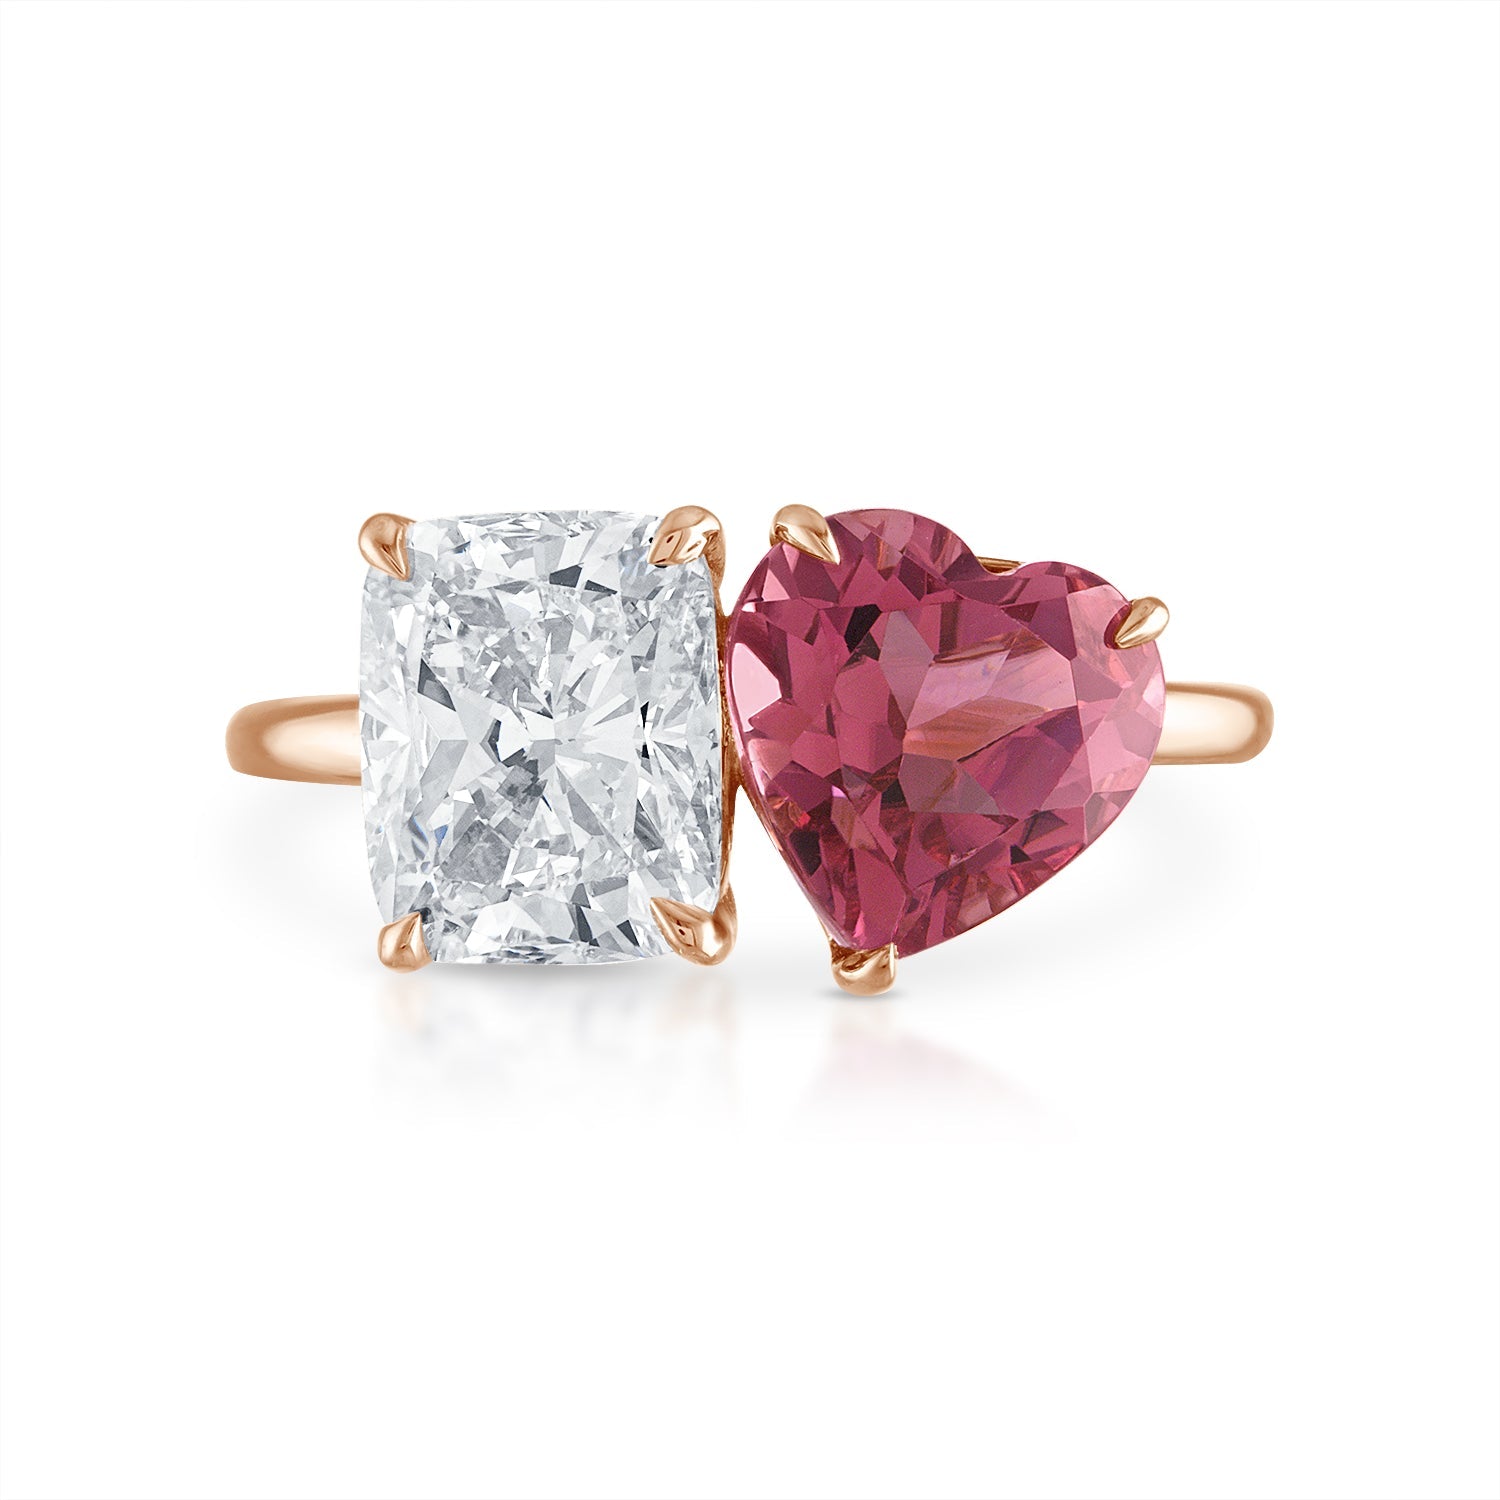 4.72cttw Elongated Cushion Cut and Pink Tourmaline Heart Shape Two-Stone Engagement Ring